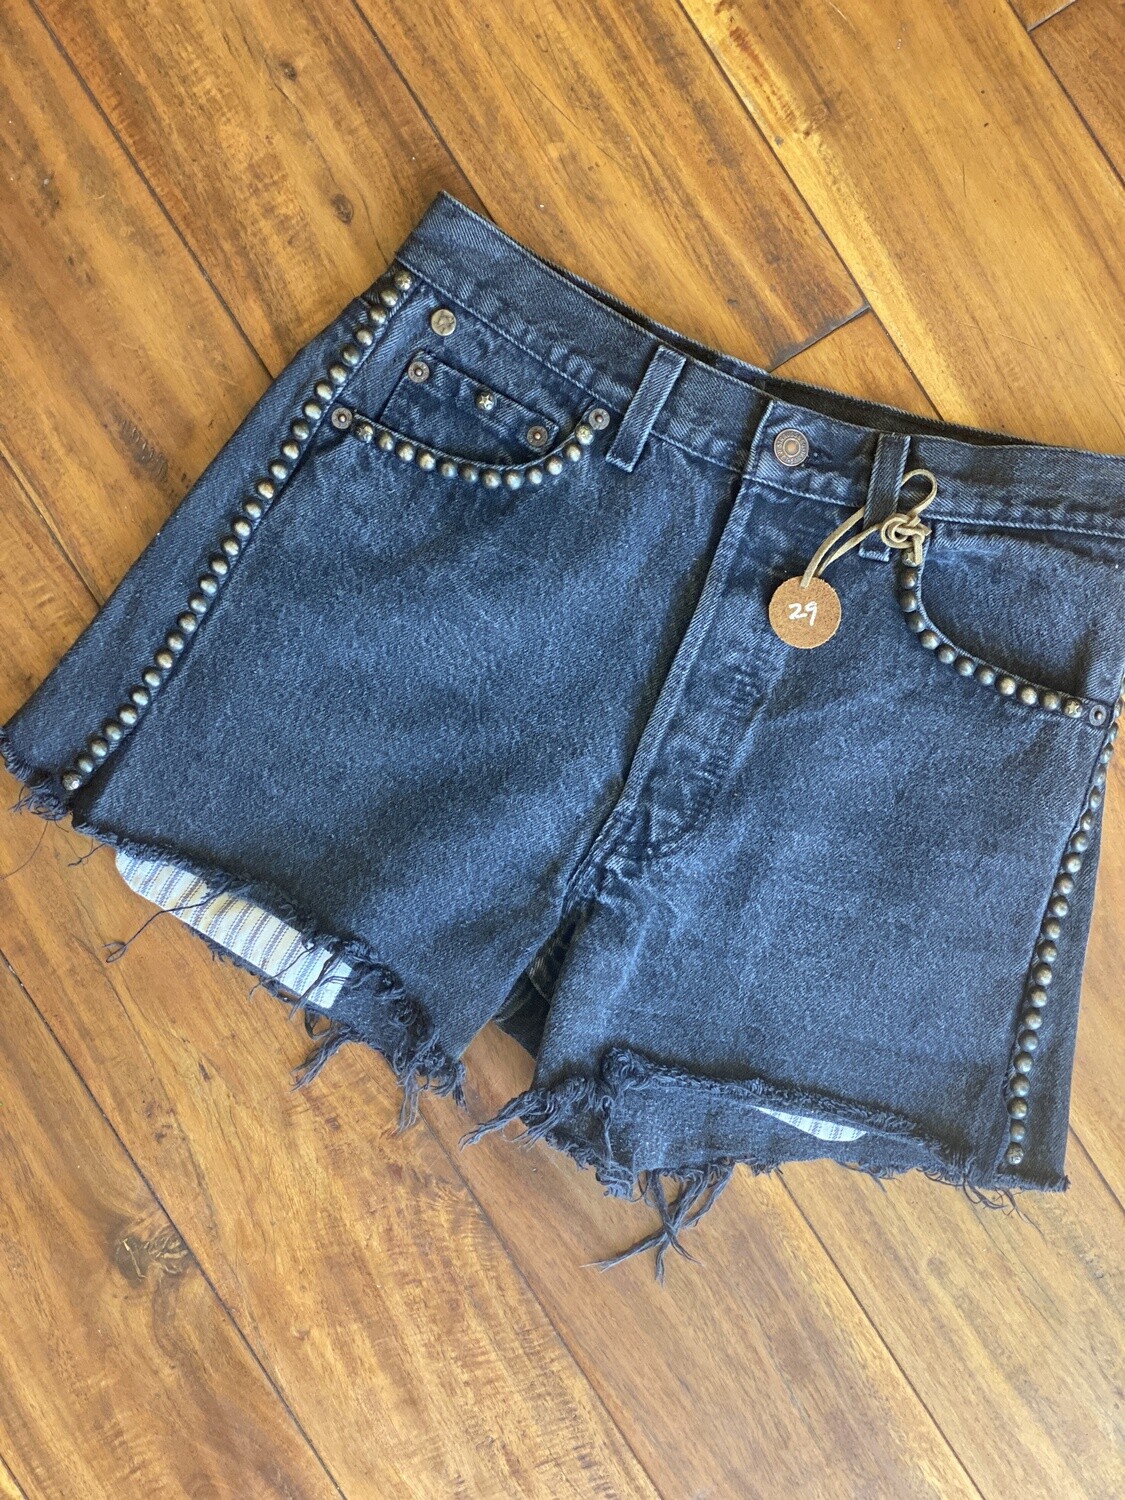 Junkyard Levi's RE-Worked Upcycled Black Denim Button fly (2) GENUINE Vintage Pre-1997 Shorts with Studs 29 Made in the U.S.A.